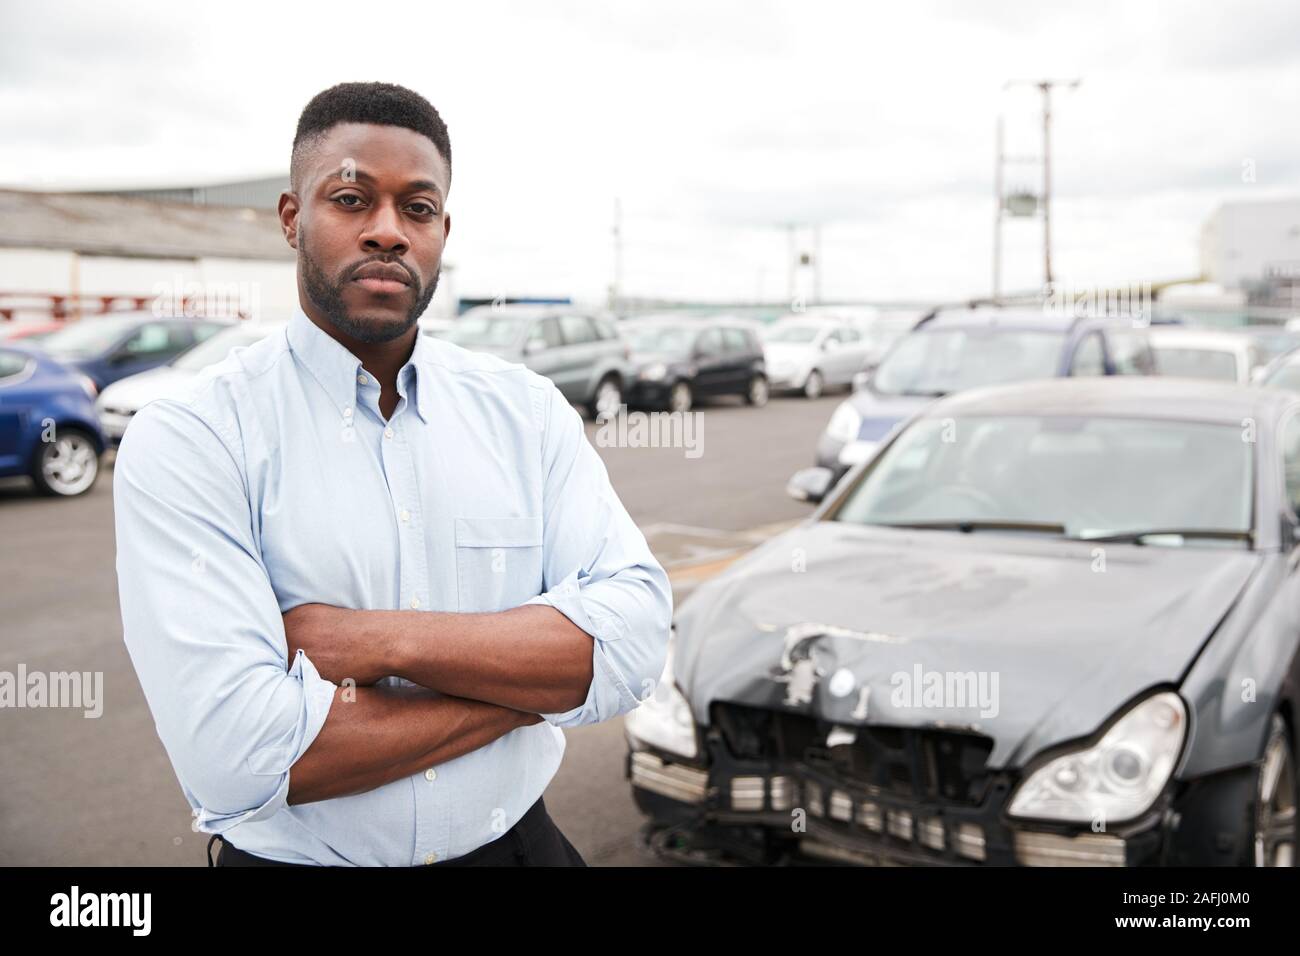 Portrait Of Motorist Standing Next To Car Damaged In Motor Accident Stock Photo